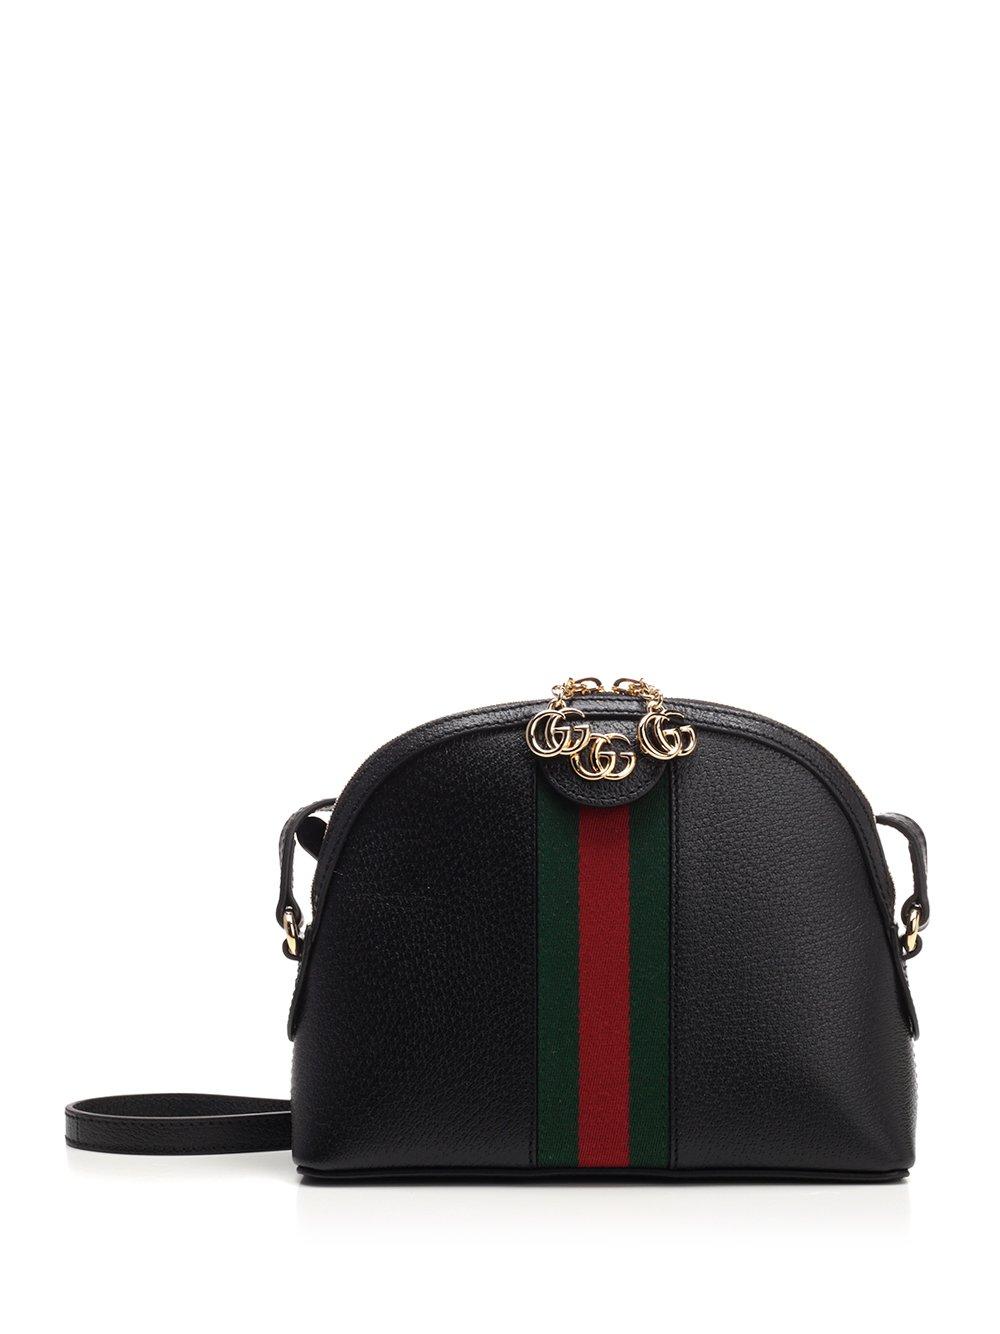 Gucci Leather Ophidia Small Shoulder Bag in Black - Lyst